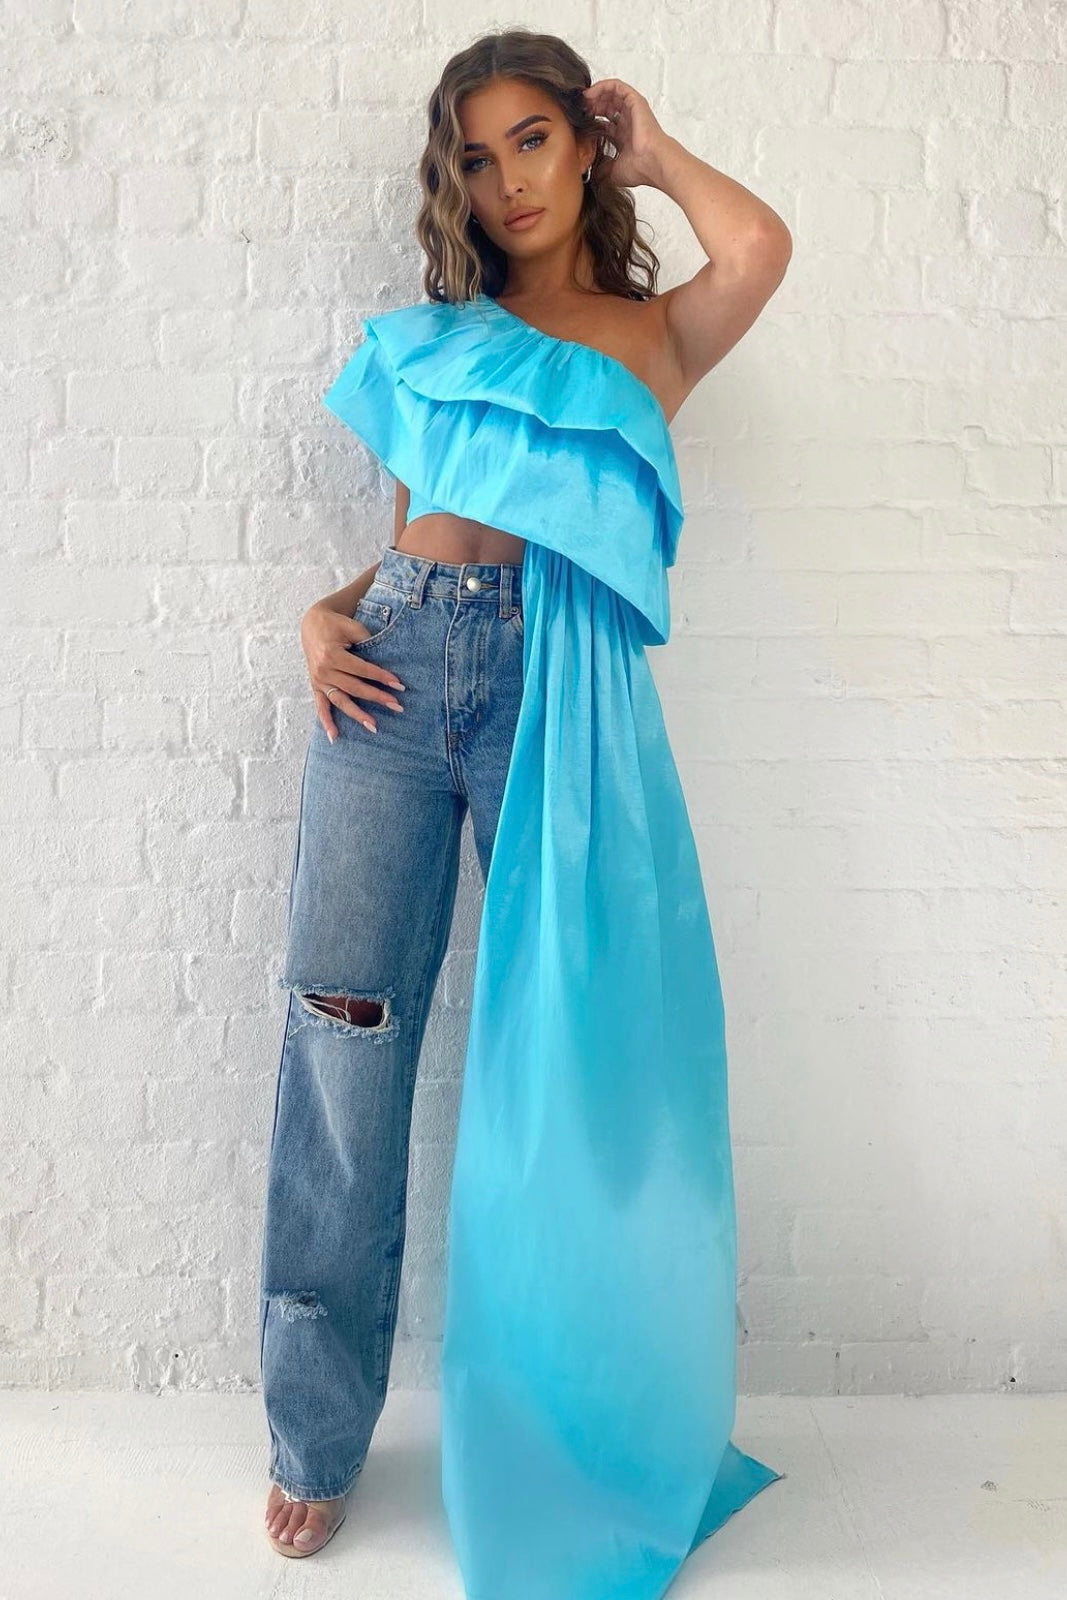 Giselle Luxe Top In Blue